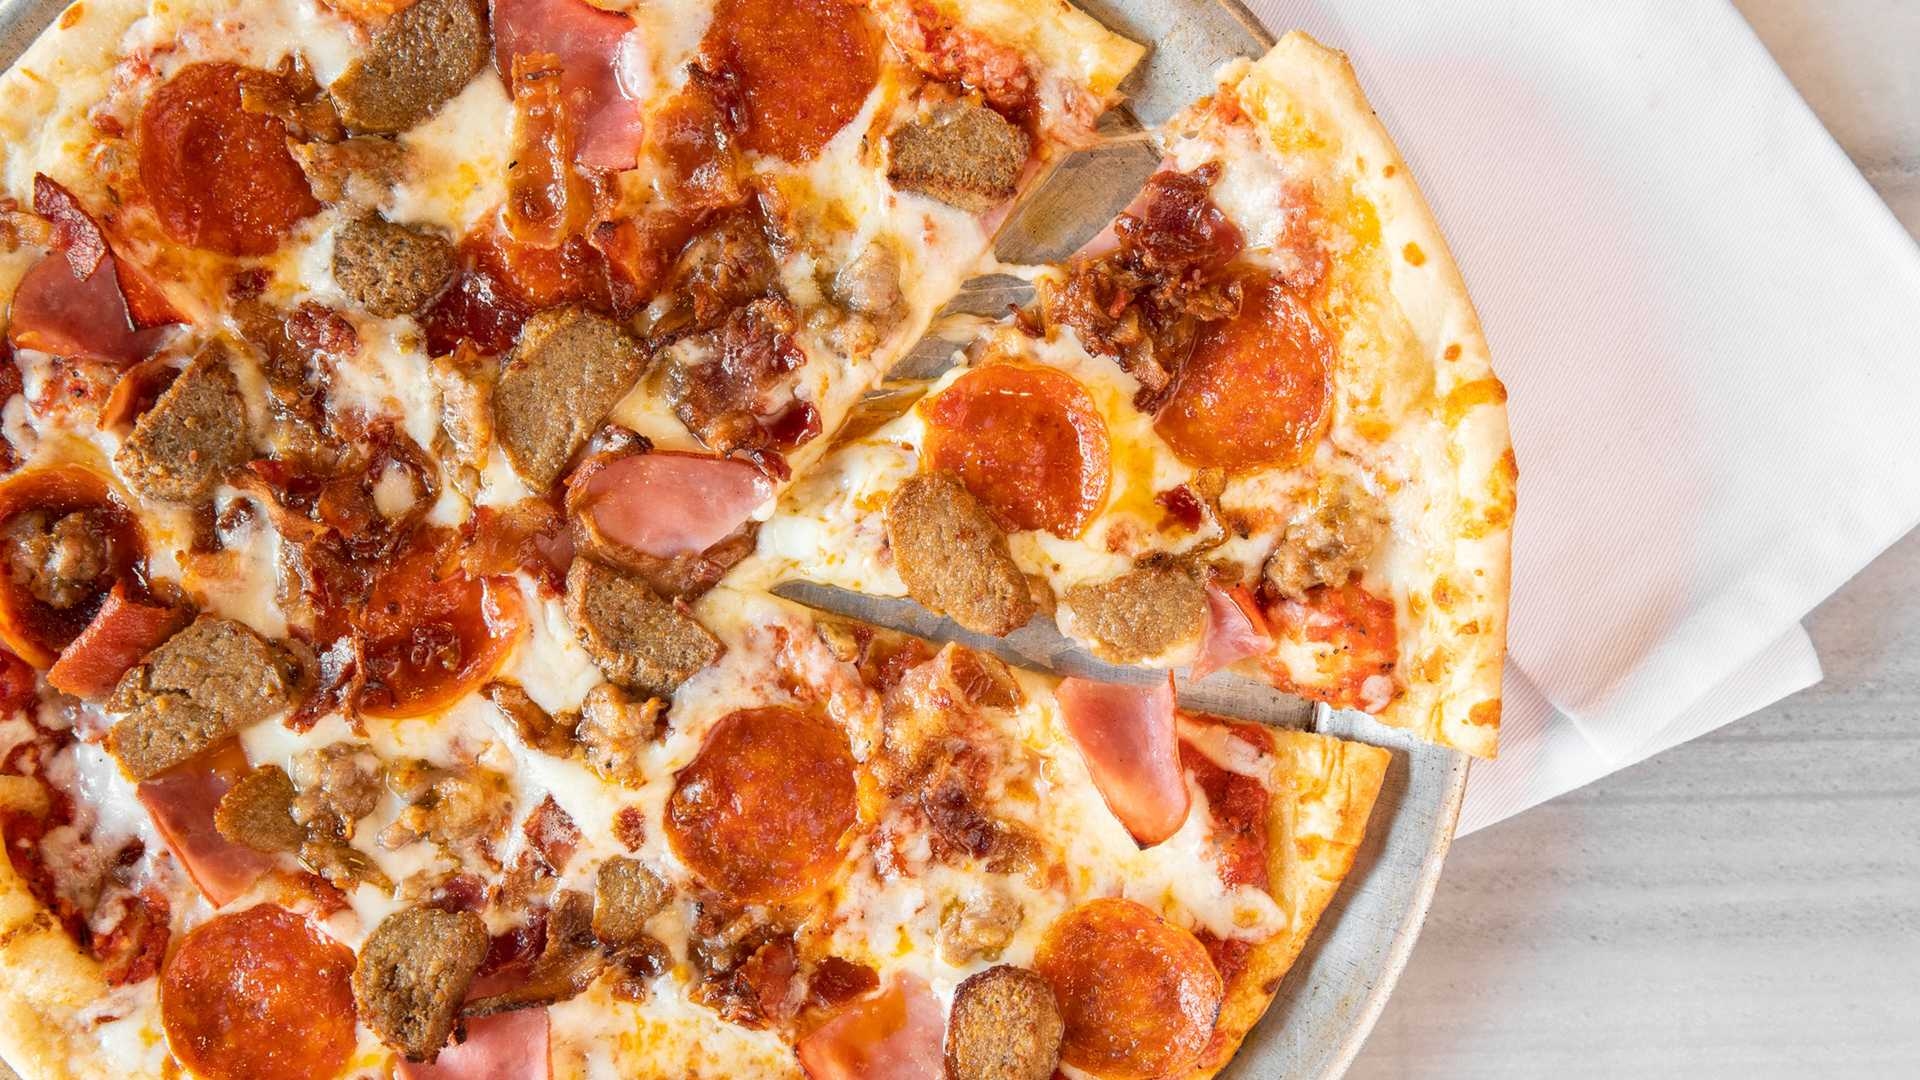 The Meatlover Delight Pizza